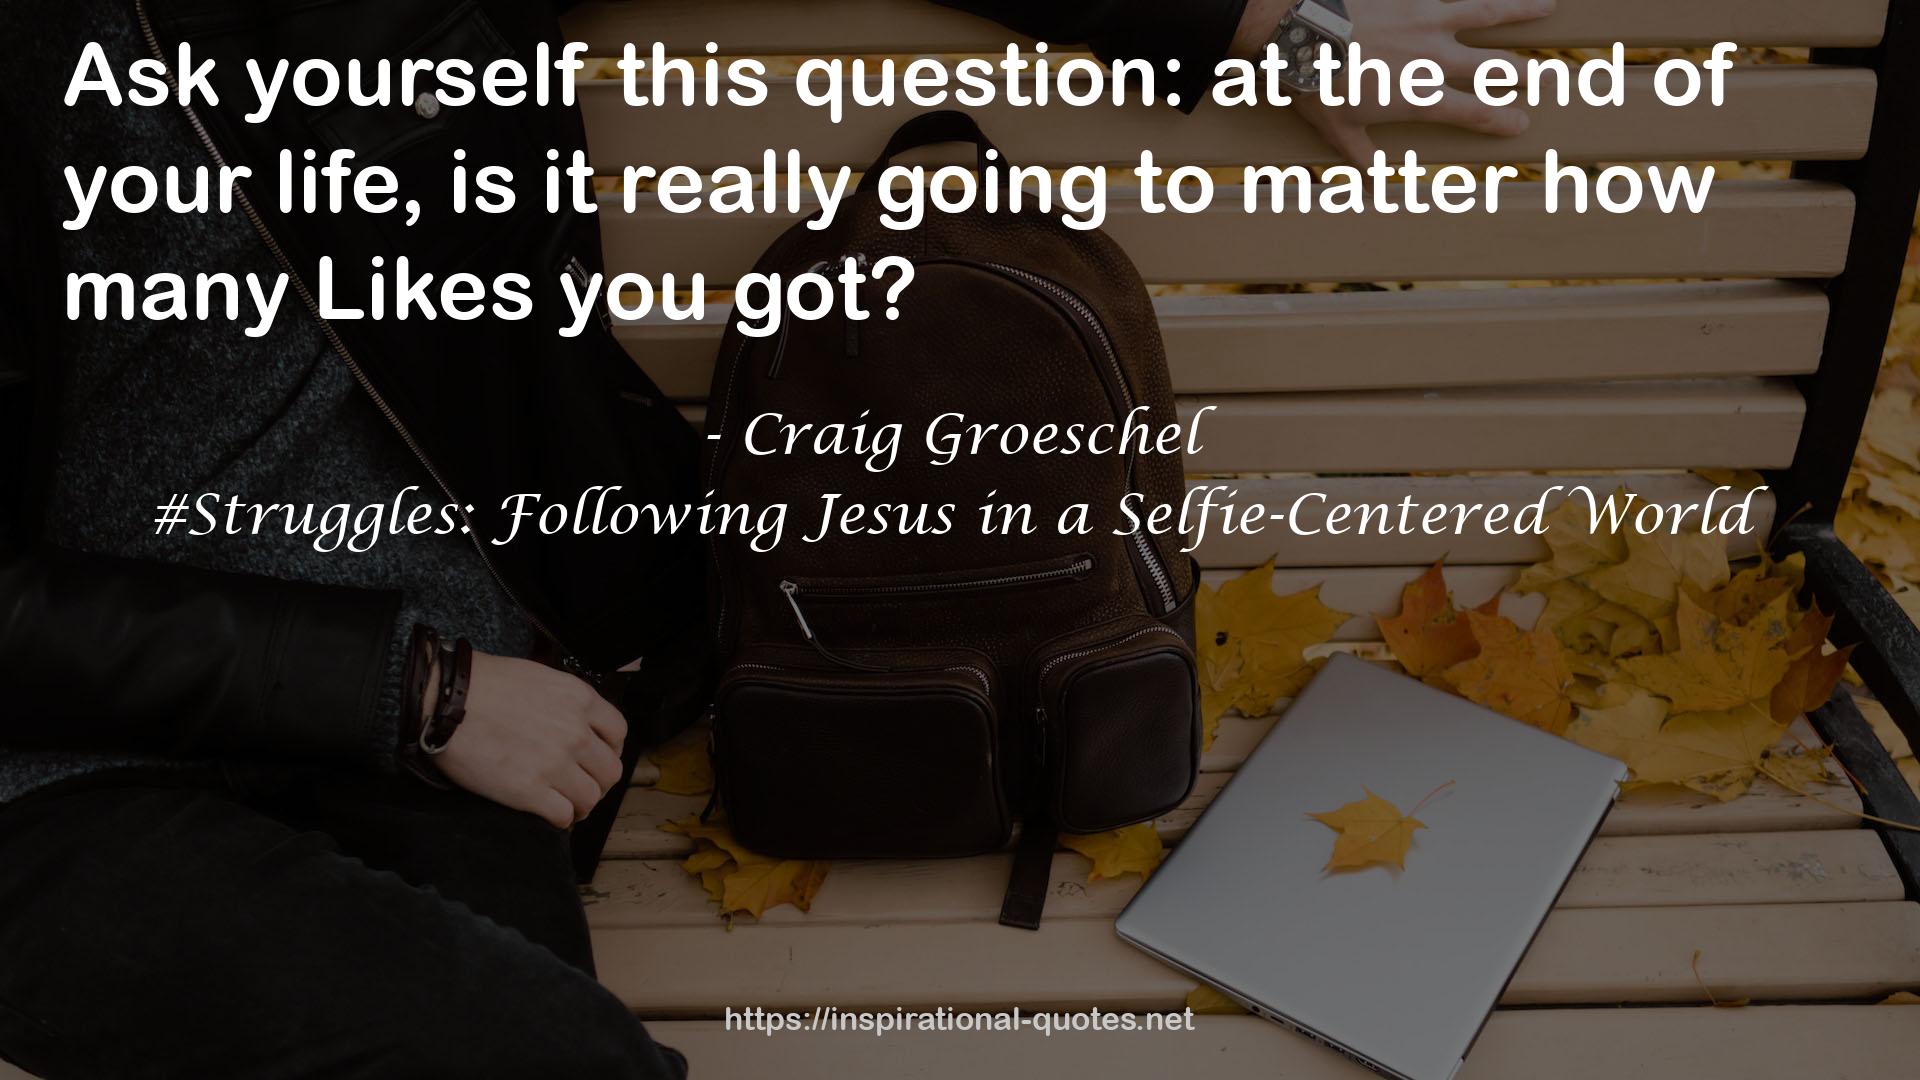 #Struggles: Following Jesus in a Selfie-Centered World QUOTES